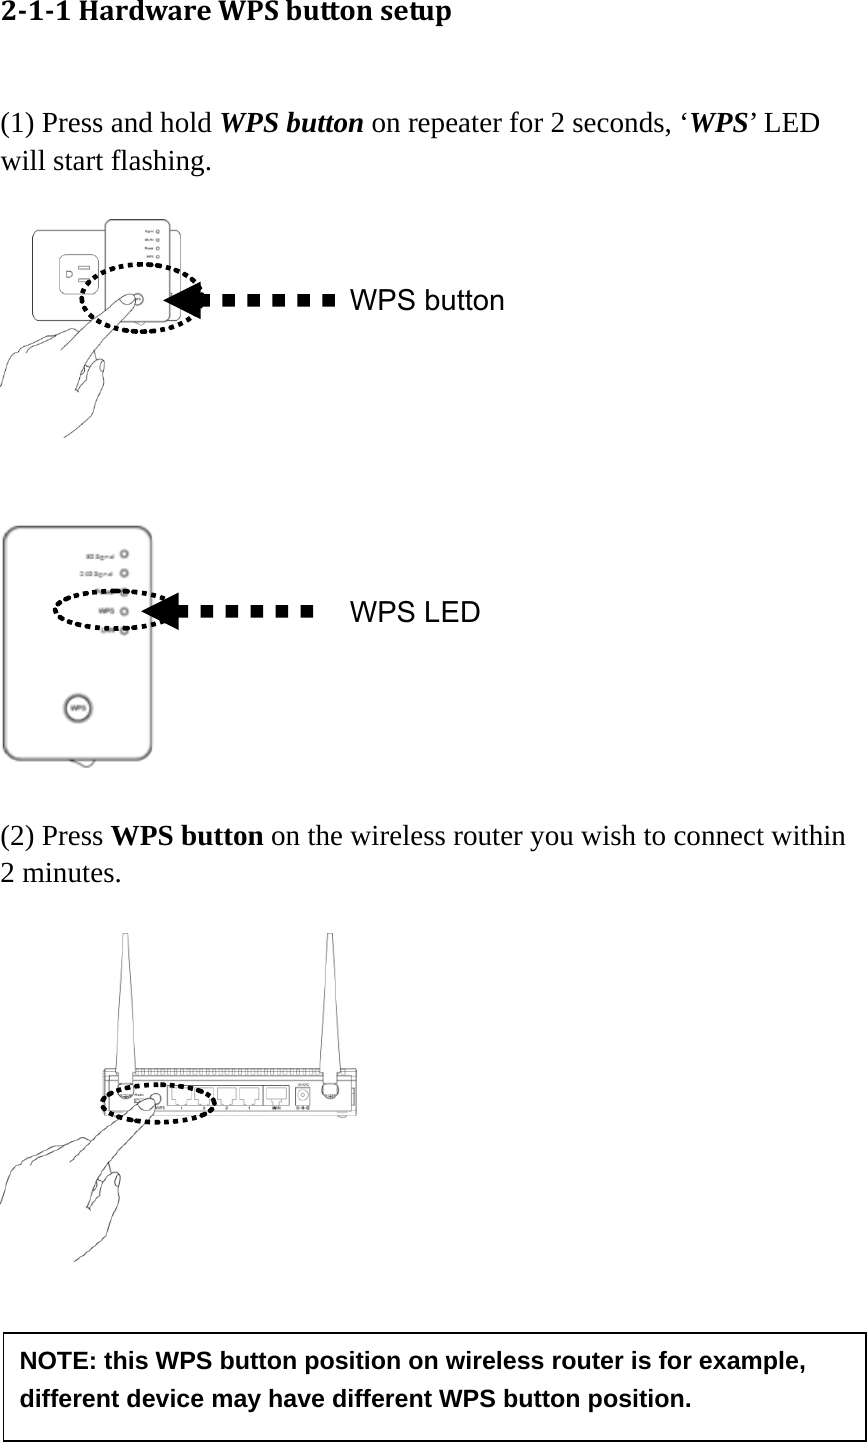 9   211HardwareWPSbuttonsetup (1) Press and hold WPS button on repeater for 2 seconds, ‘WPS’ LED will start flashing.       (2) Press WPS button on the wireless router you wish to connect within 2 minutes.      WPS LEDWPS buttonNOTE: this WPS button position on wireless router is for example, different device may have different WPS button position. 